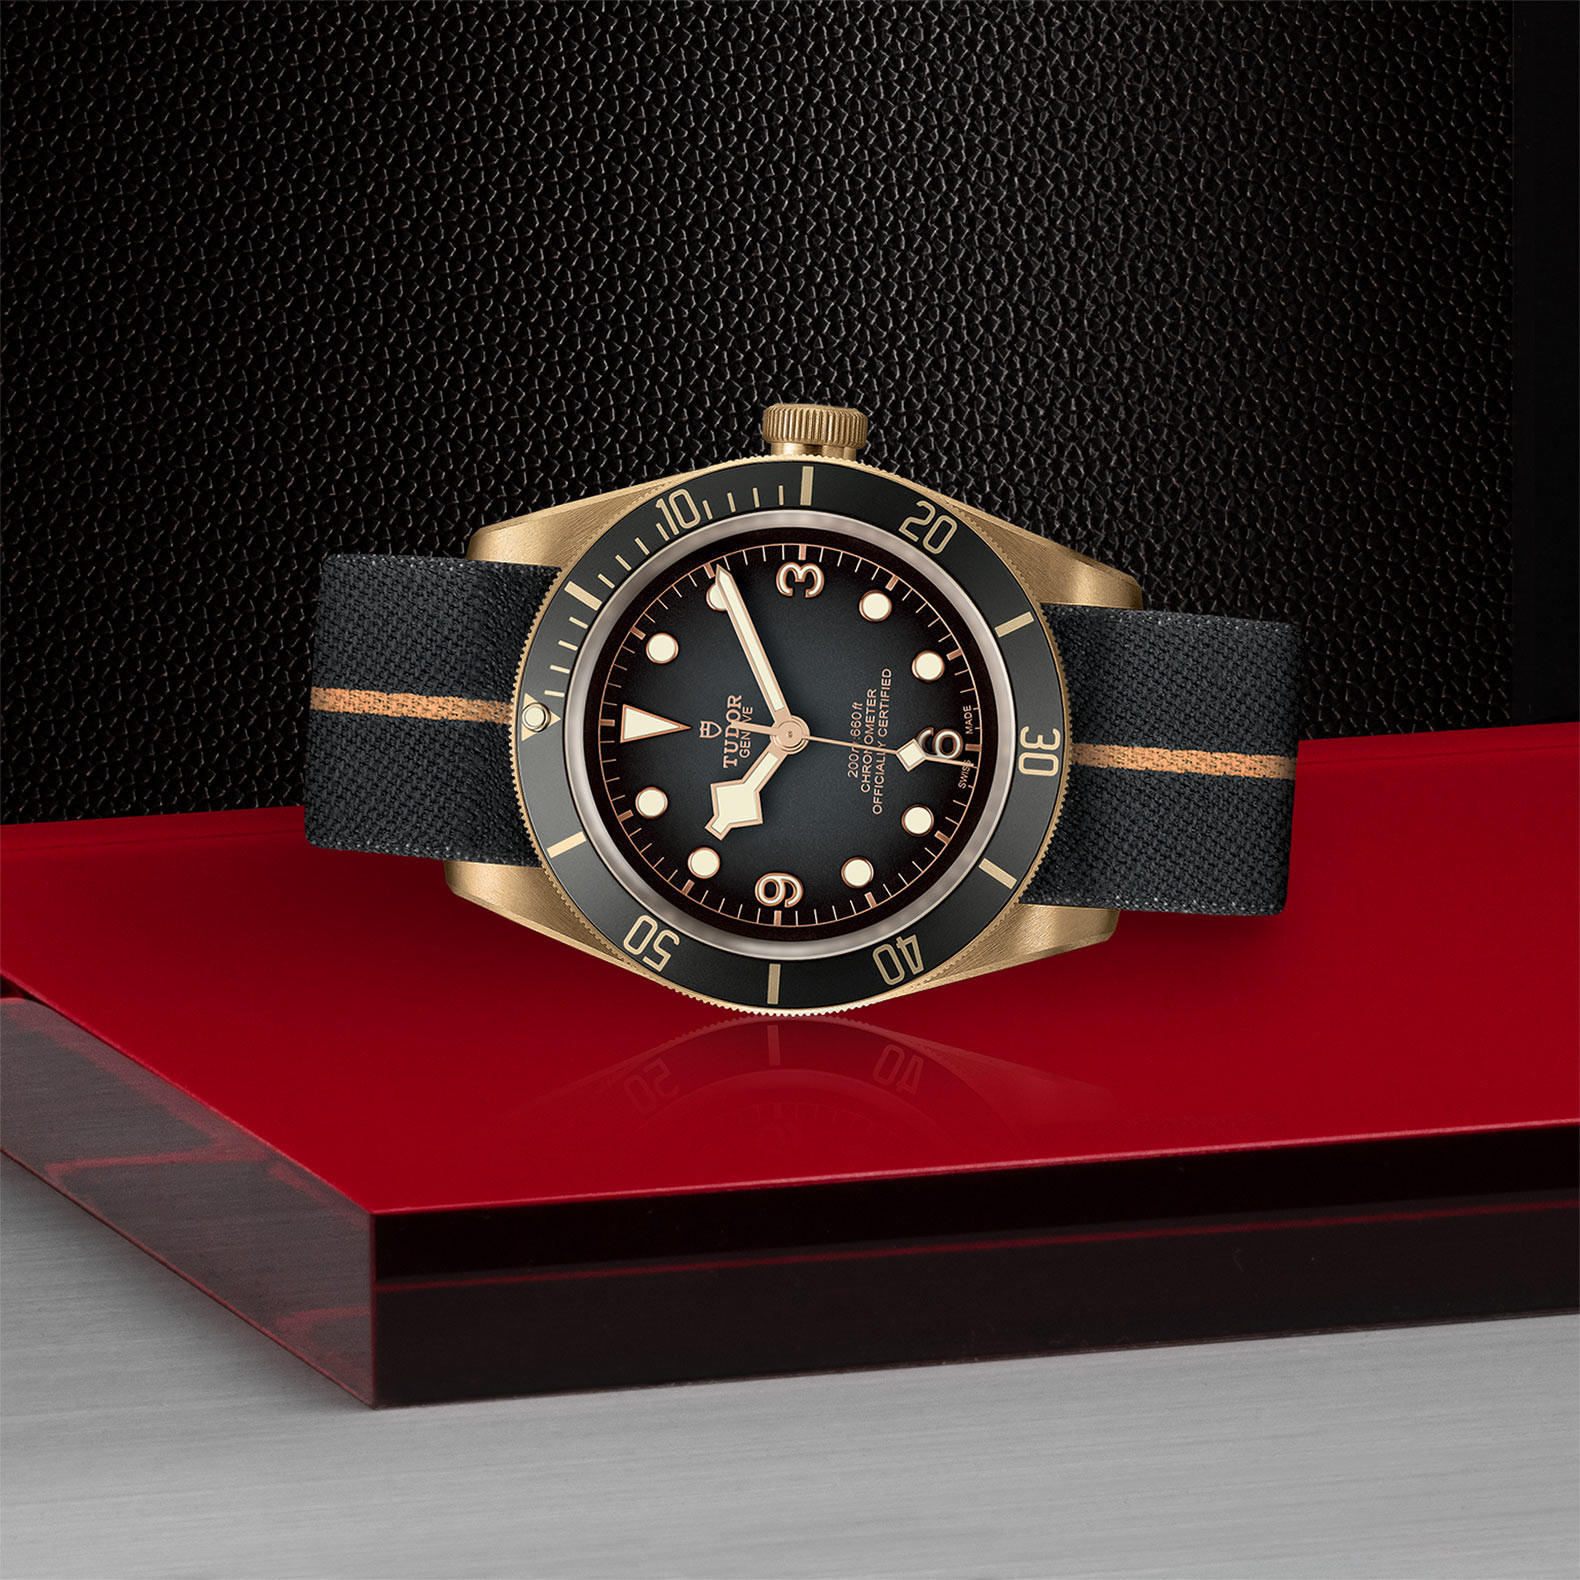 TUDOR Black Bay Bronze Watch in Store Laying Down